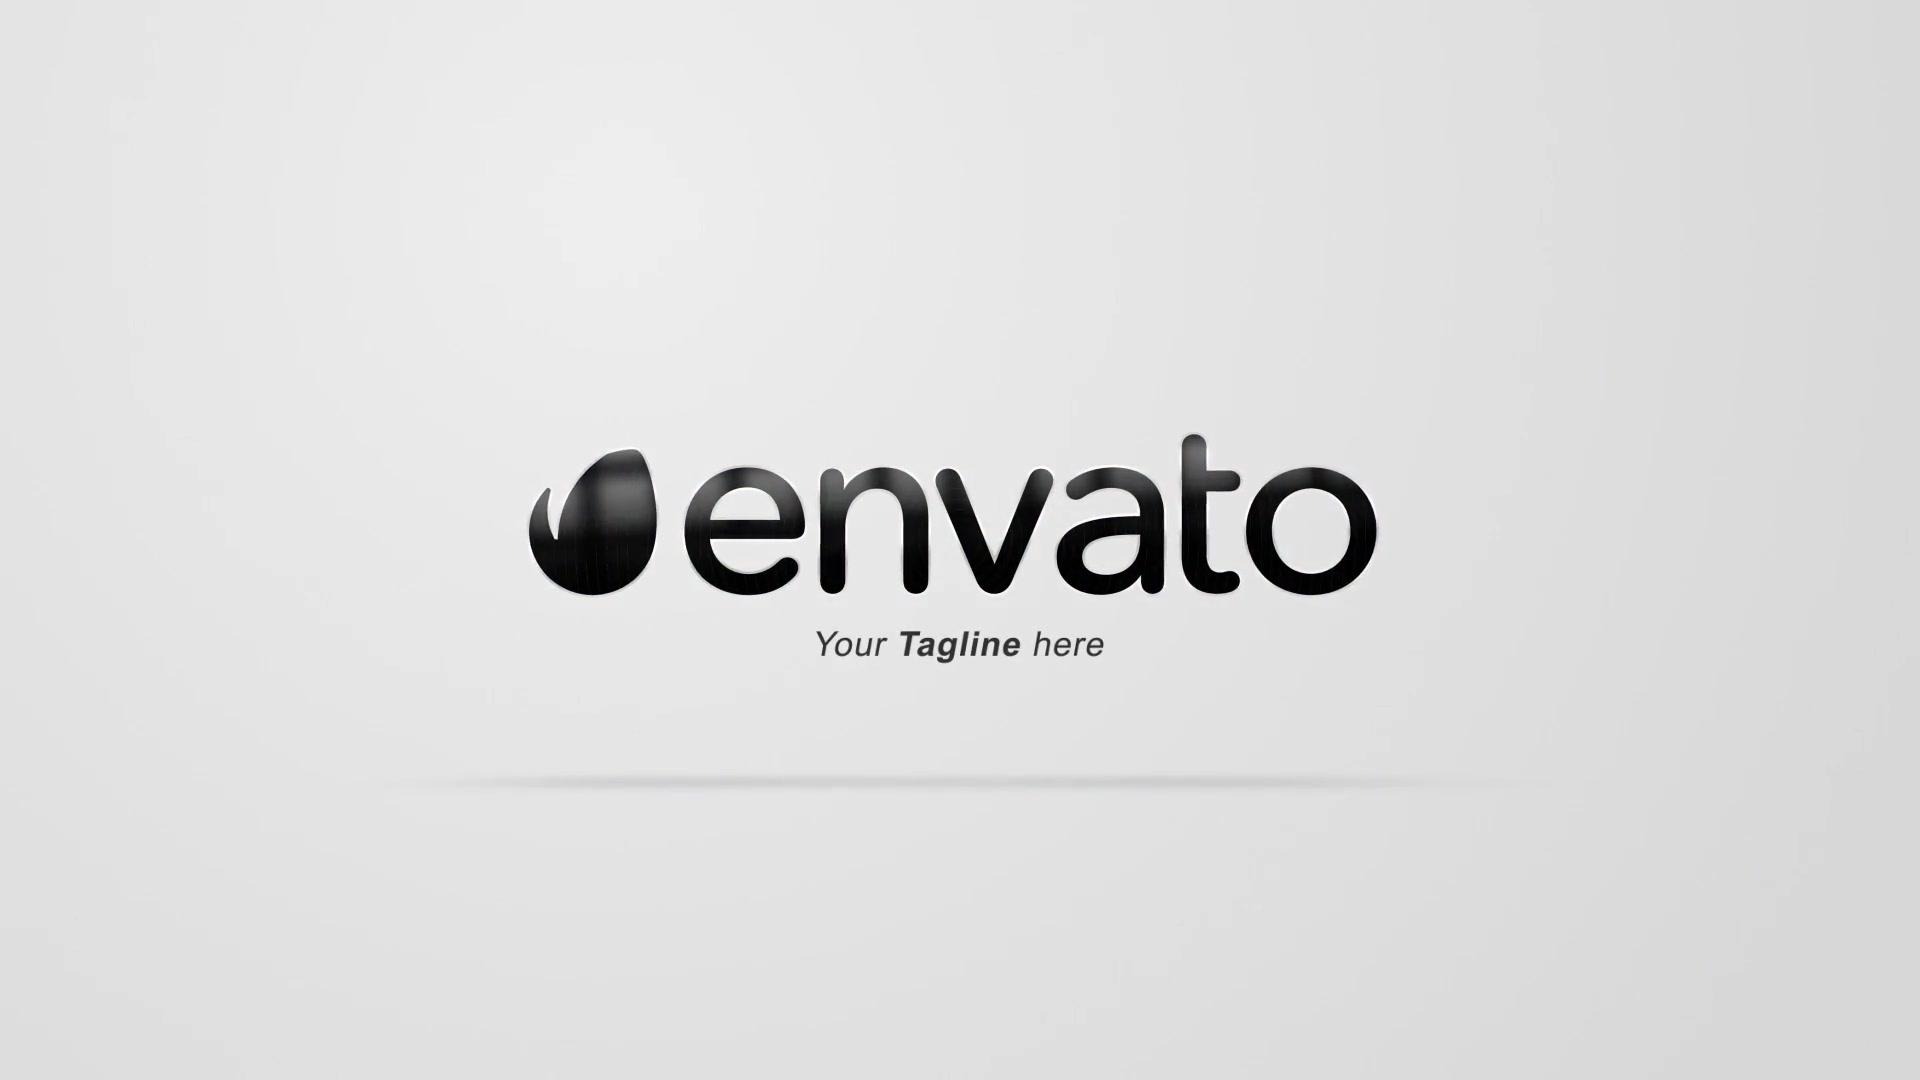 Clean Fold Logo - Download Videohive 11765820